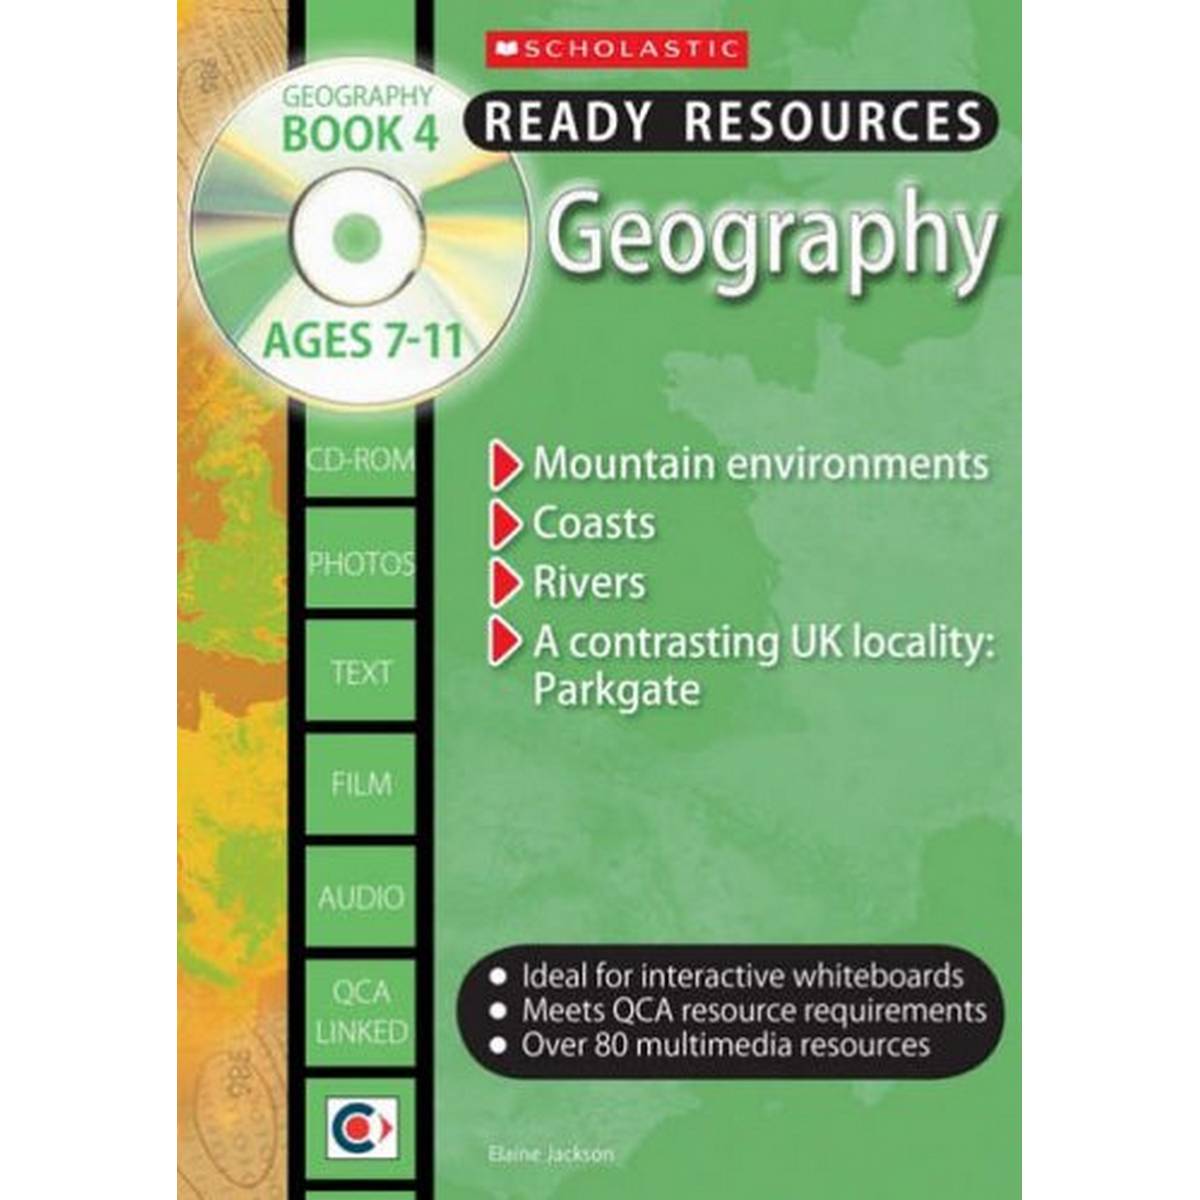 Ready Resources Geography Book 4